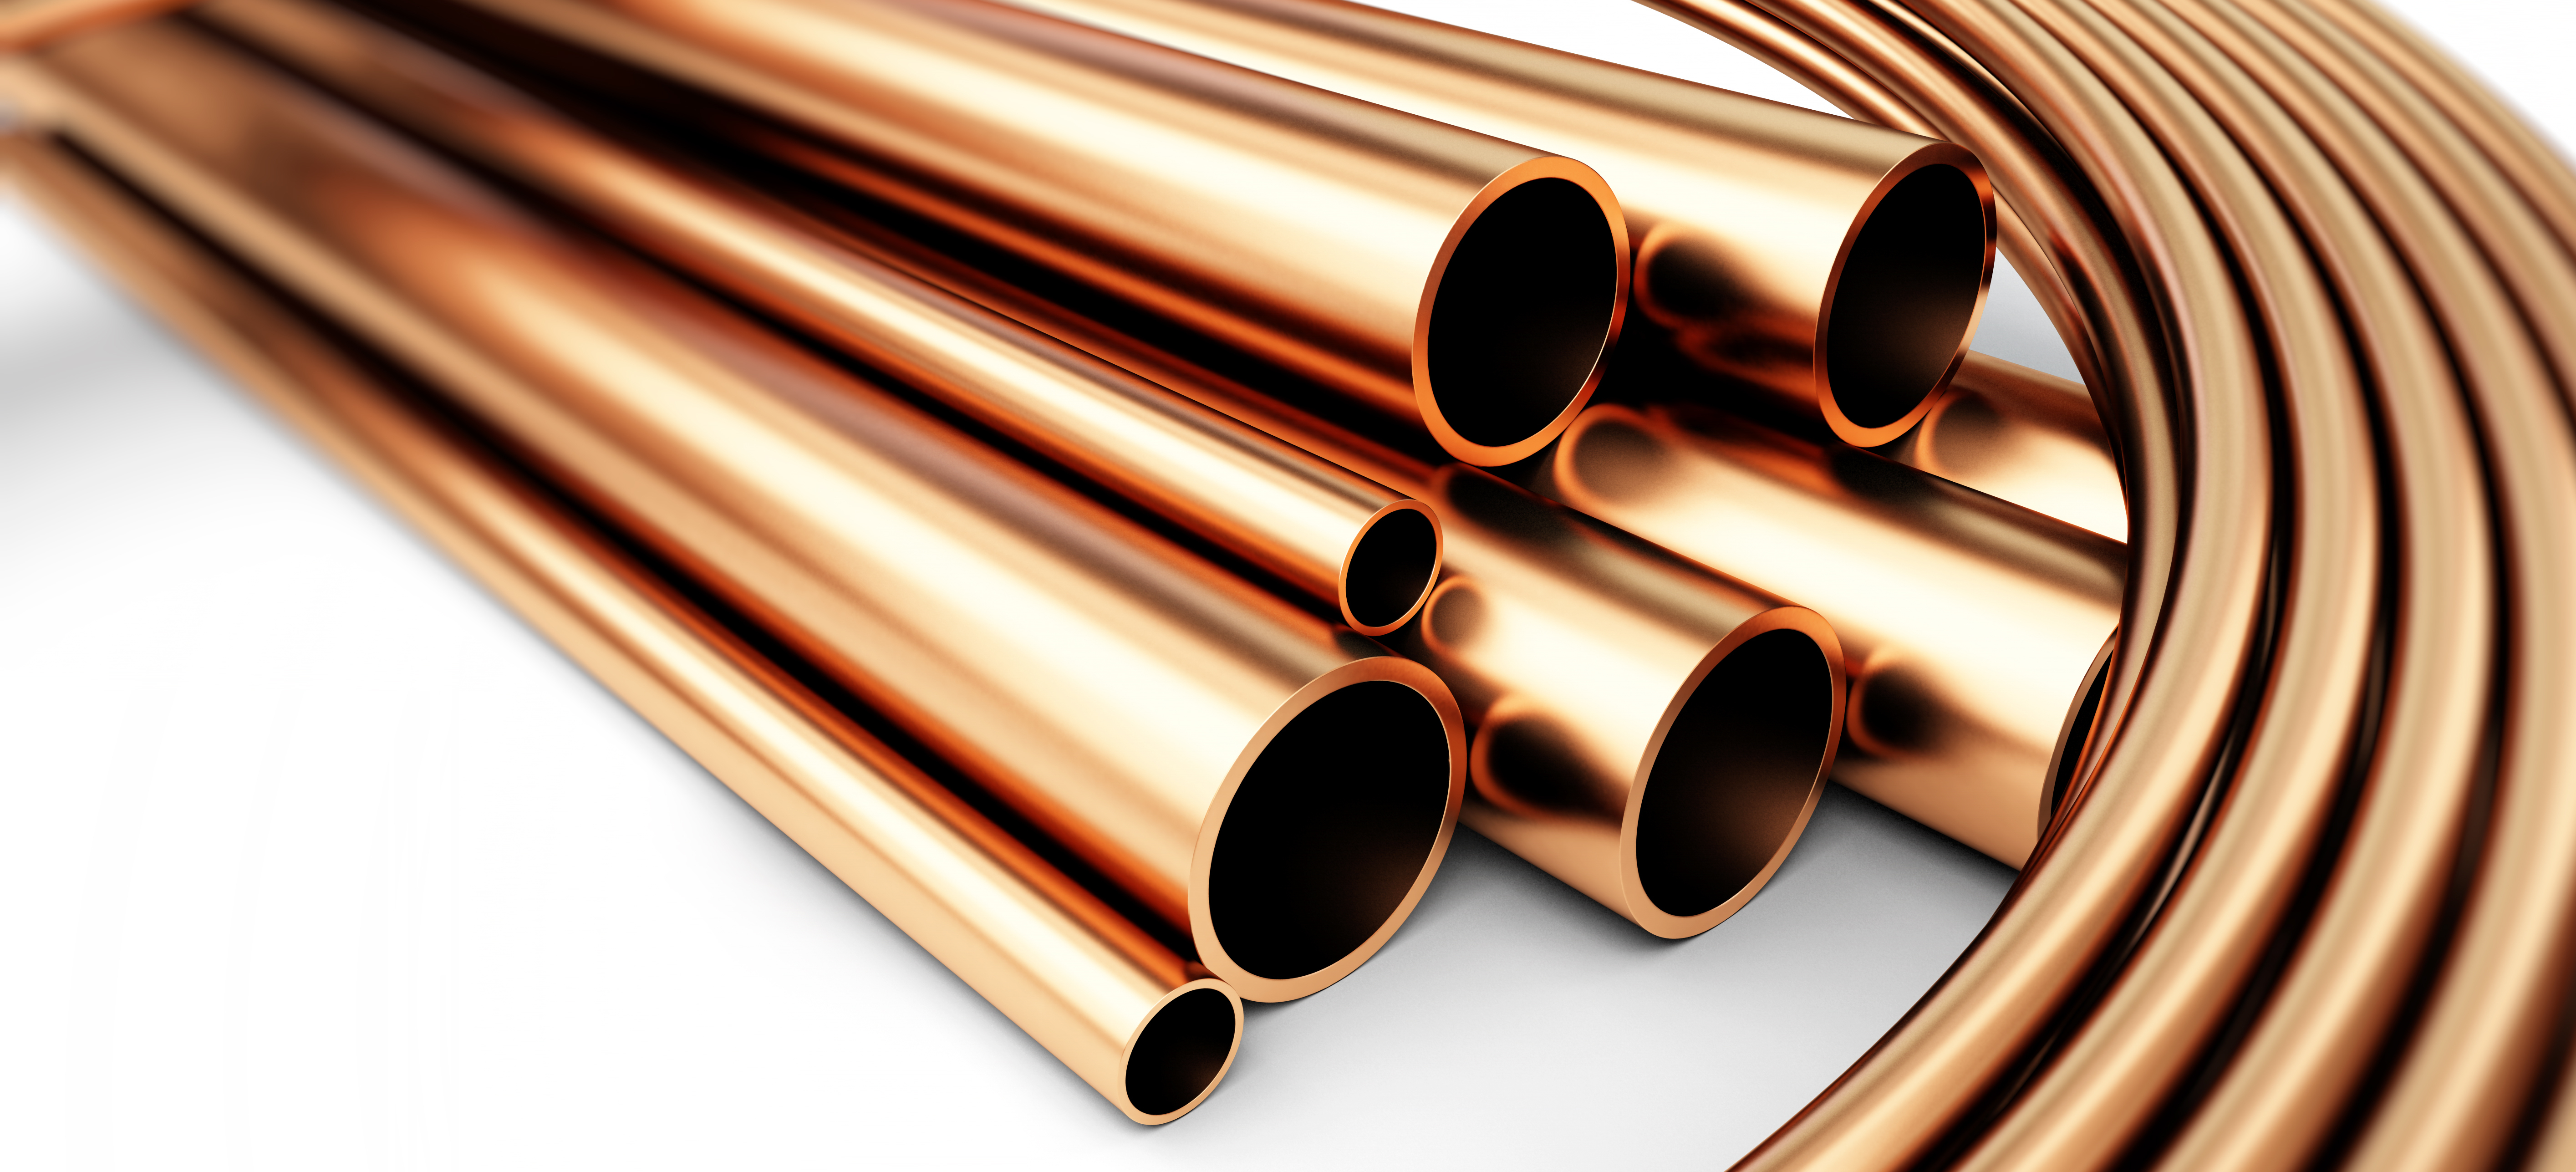 Copper Wave Analysis – 28 March, 2019